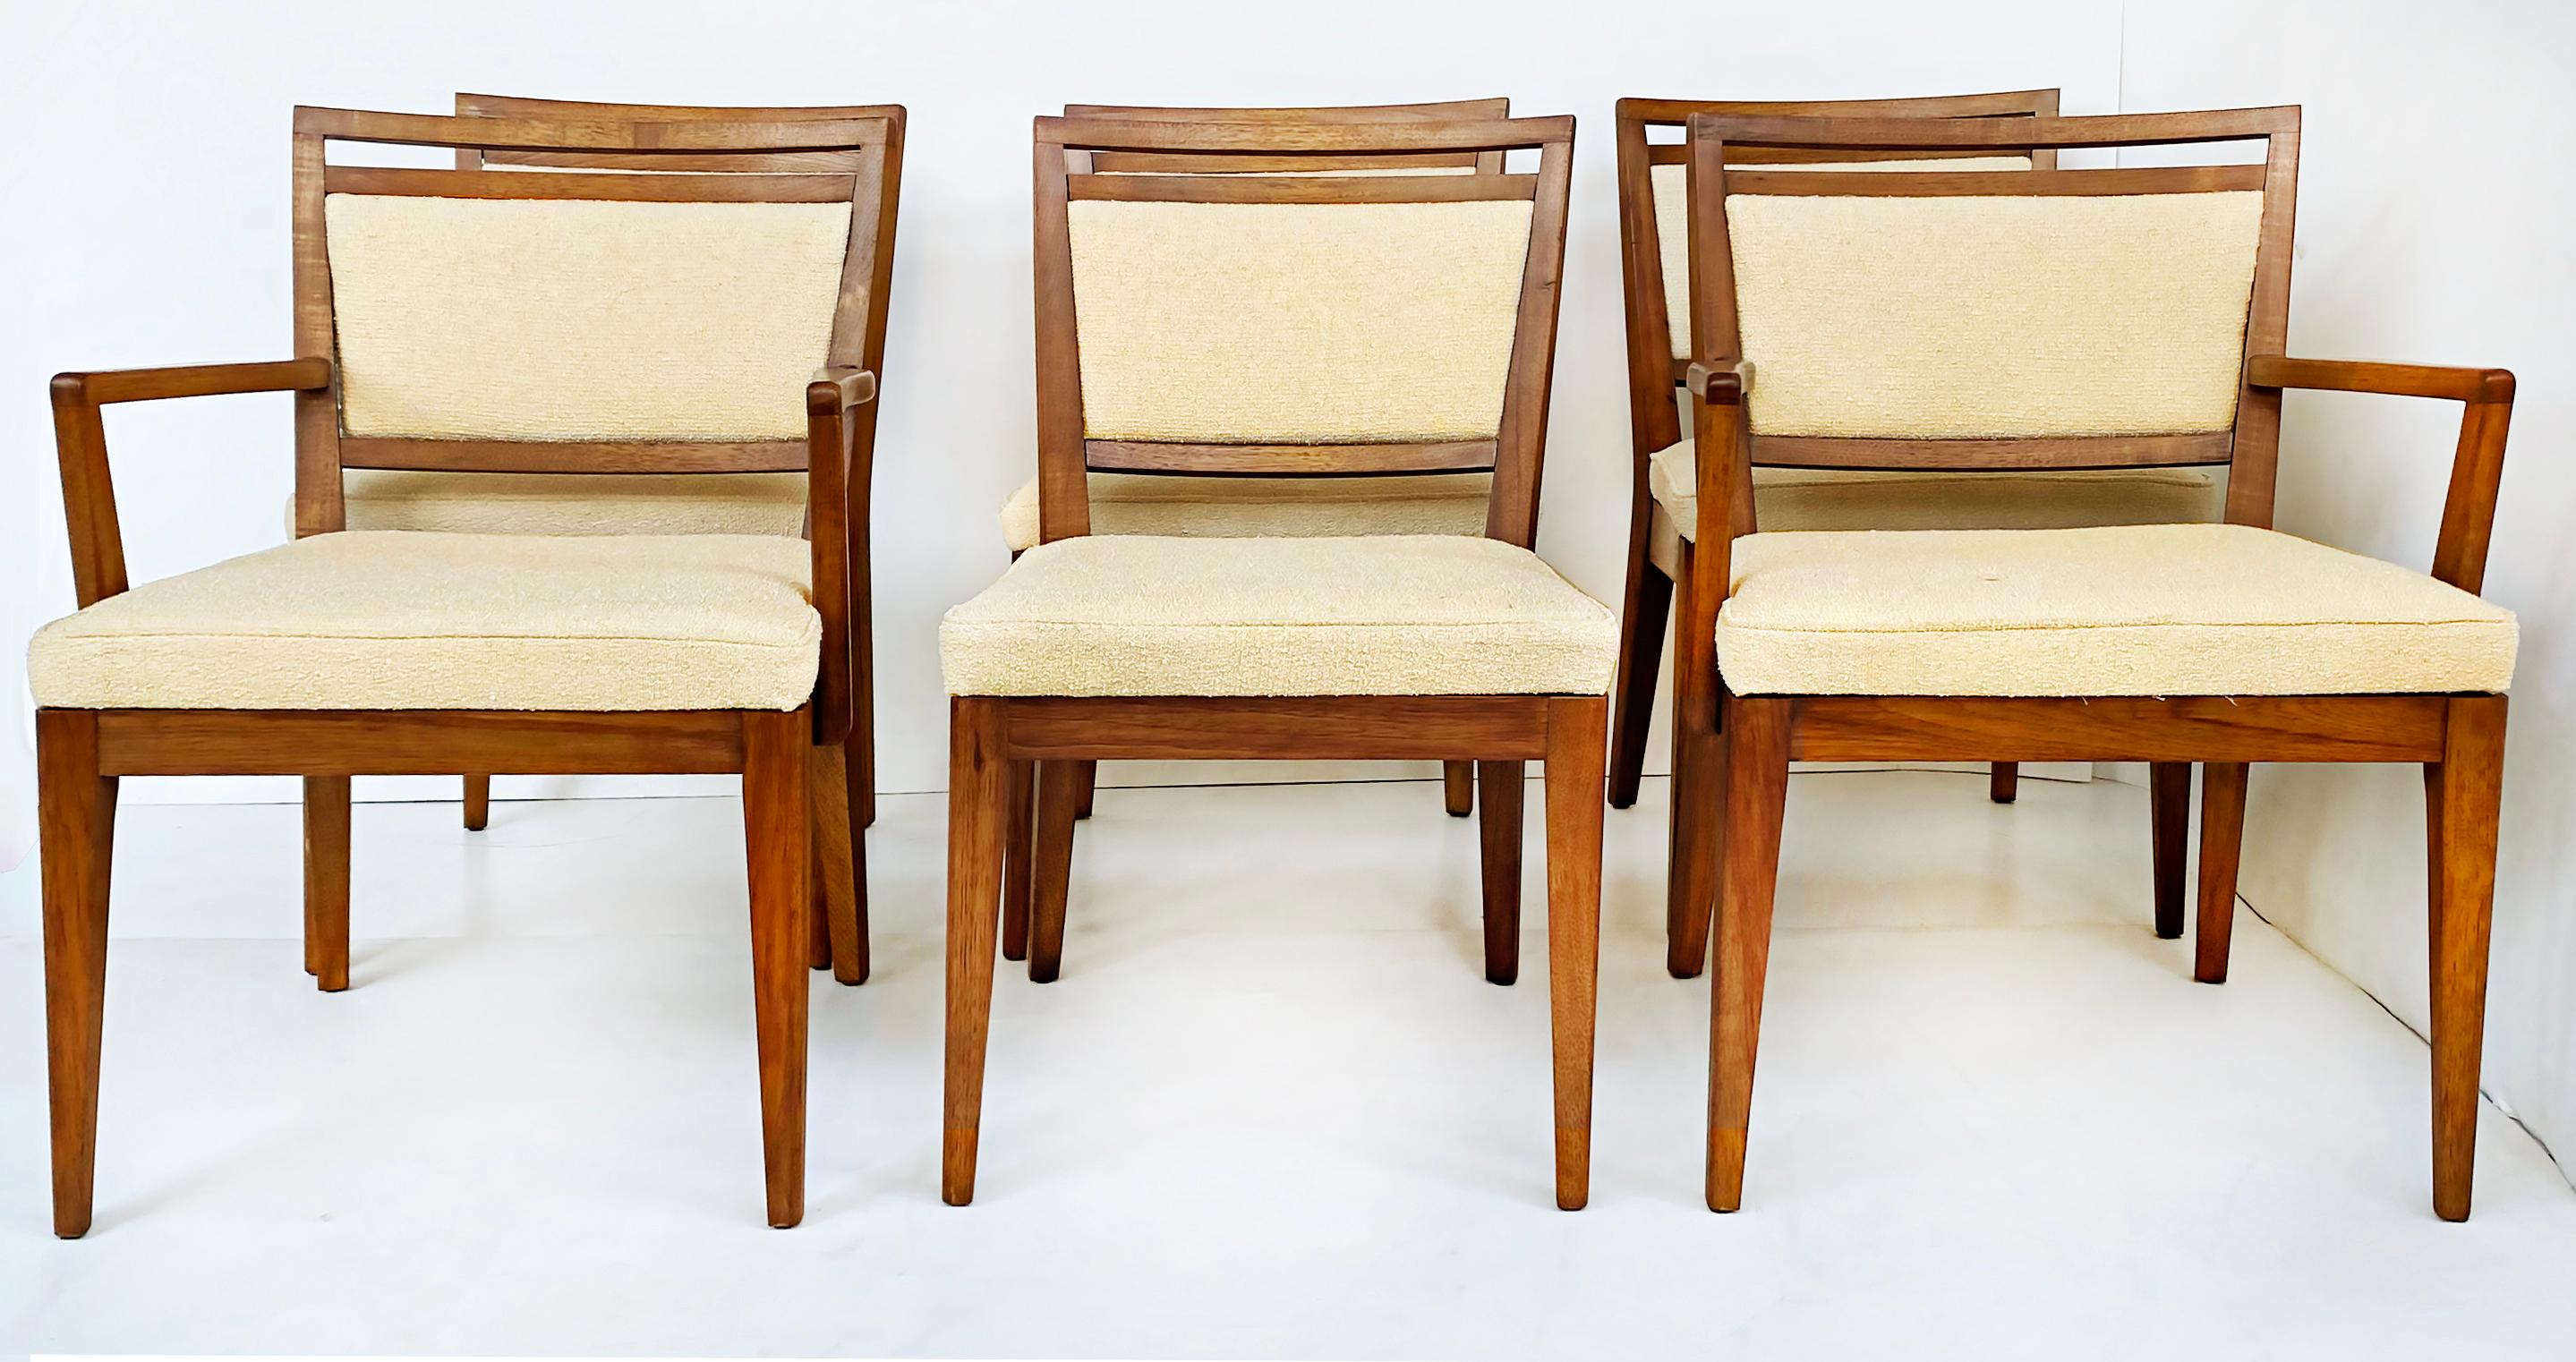 Restored Mid-Century Modern mahogany dining chairs, 1950s set of 6

Offered for sale is a newly upholstered and refinished set of 6 Mid-century Modern mahogany dining chairs that are attributed to the Modernage Furniture Company. This circa 1950s